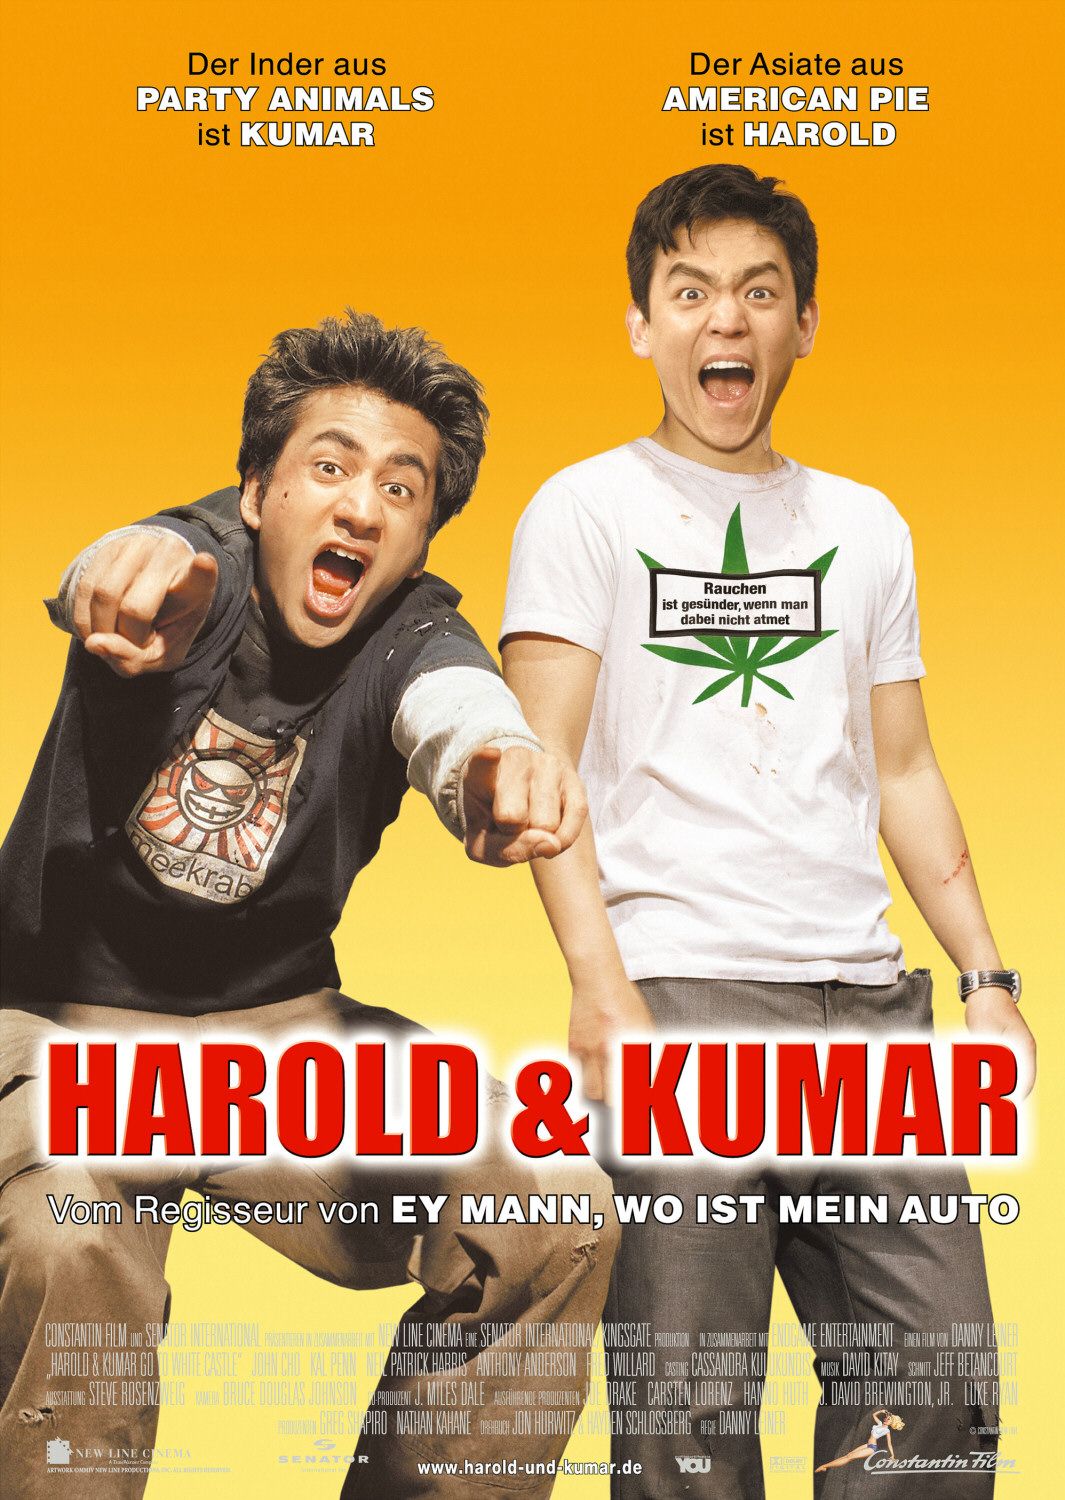 Extra Large Movie Poster Image for Harold & Kumar Go To White Castle (#4 of 5)